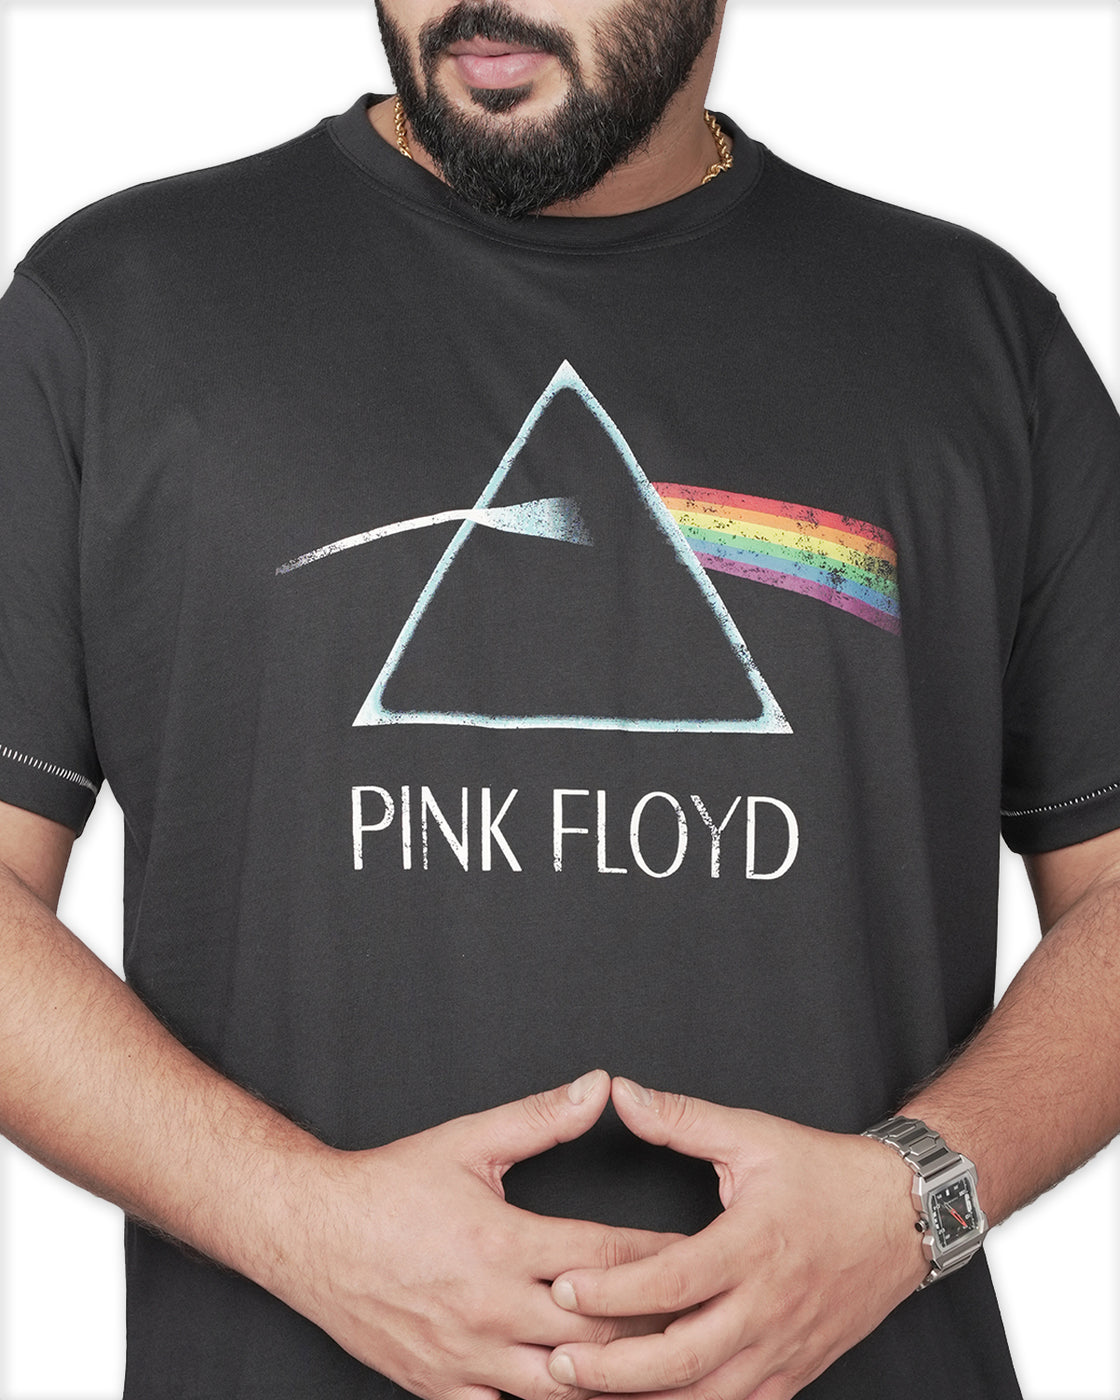 Pink Floyd Graphic Print T-Shirt by D555